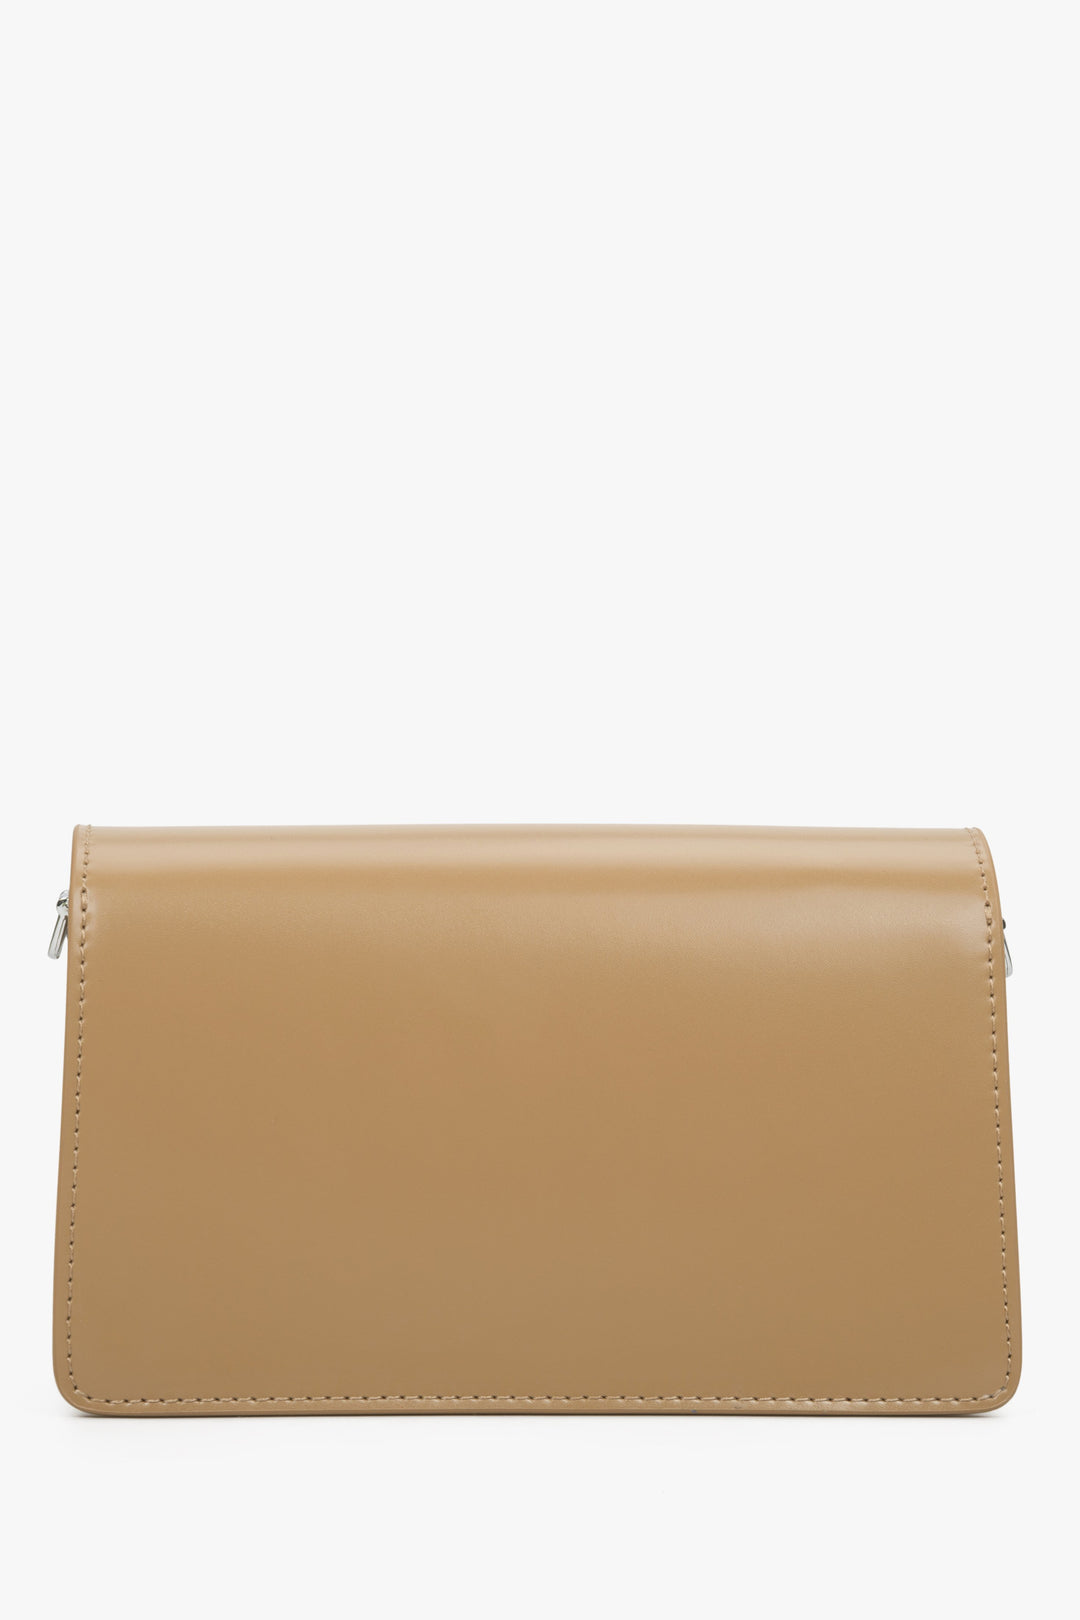 Women's small Estro bag in light brown - back view of the model.